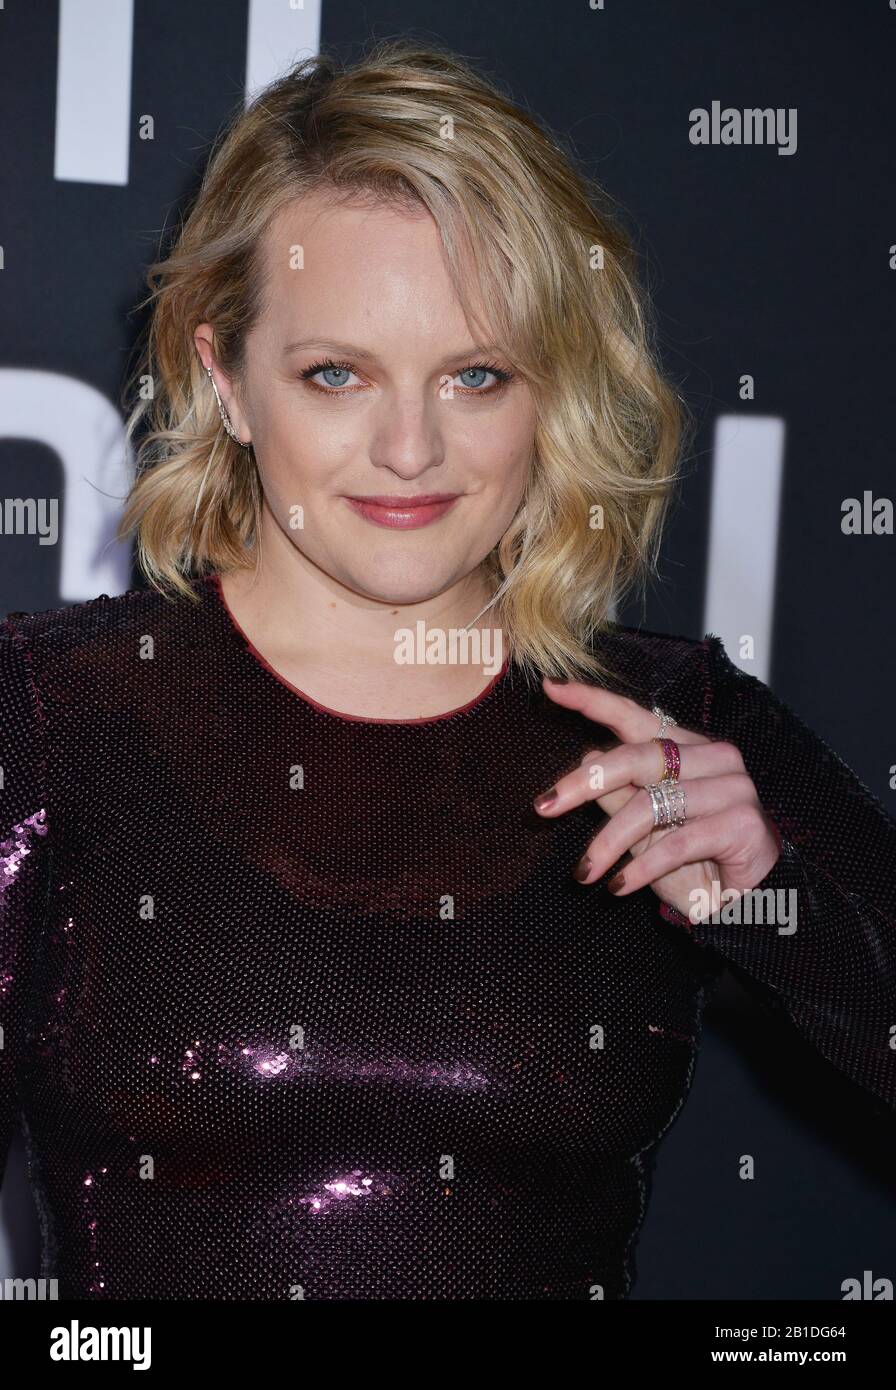 Los Angeles, USA. 25th Feb, 2020. Elizabeth Moss 024 attends the Premiere of Universal Pictures' 'The Invisible Man' at TCL Chinese Theatre on February 24, 2020 in Hollywood, California Credit: Tsuni/USA/Alamy Live News Stock Photo